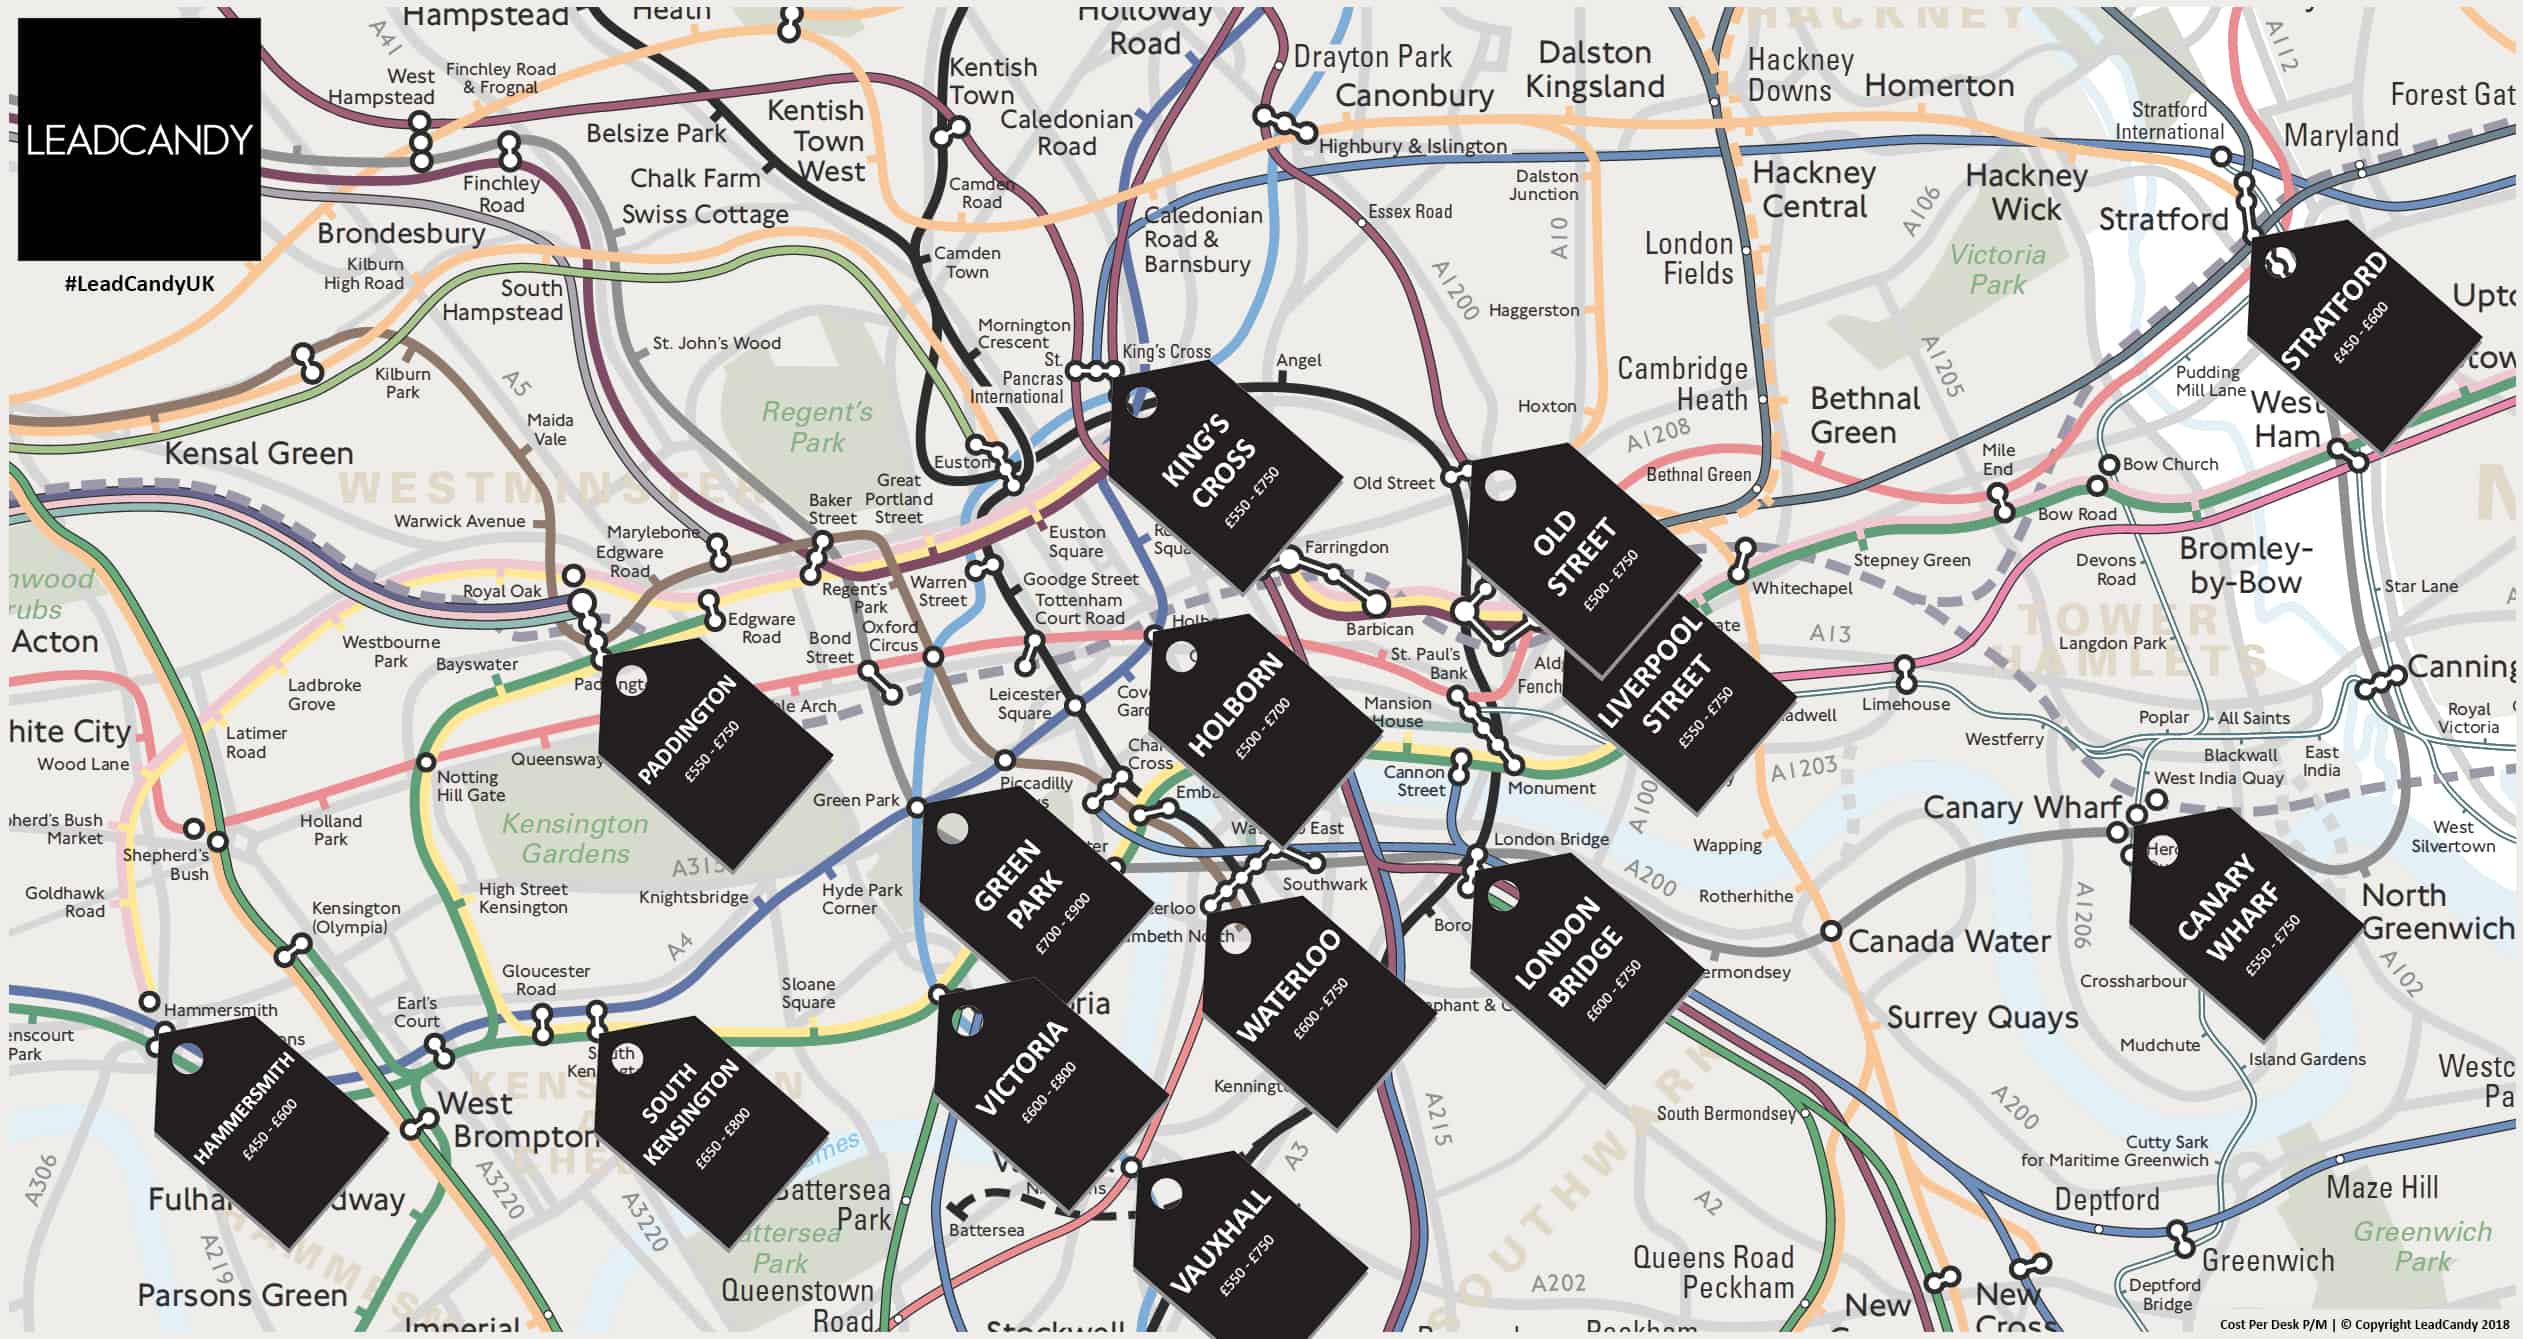 Approximate Cost Per Desk Tube Map For London